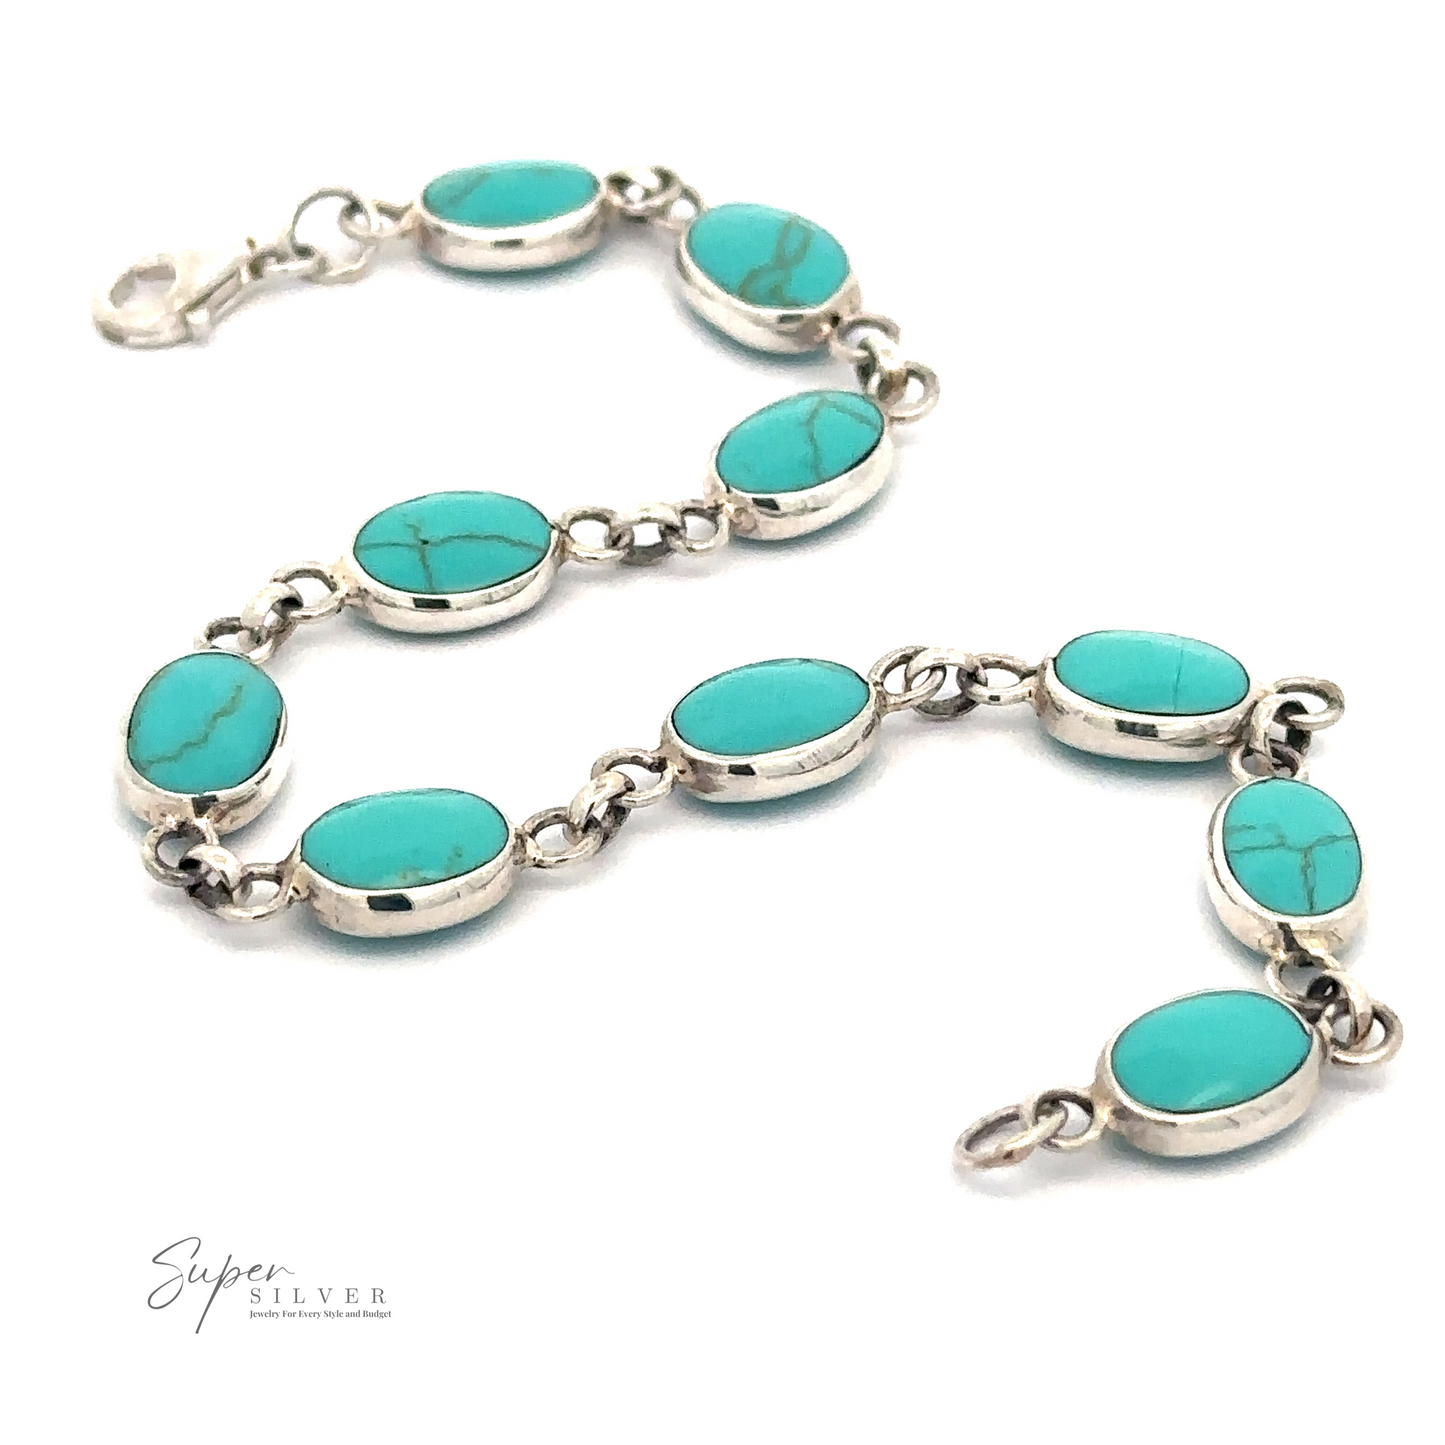 
                  
                    A stunning Oval Turquoise Bracelet featuring oval turquoise stones set in sterling silver jewelry links, arranged in a graceful curved pattern. The clasp is visible at one end.
                  
                